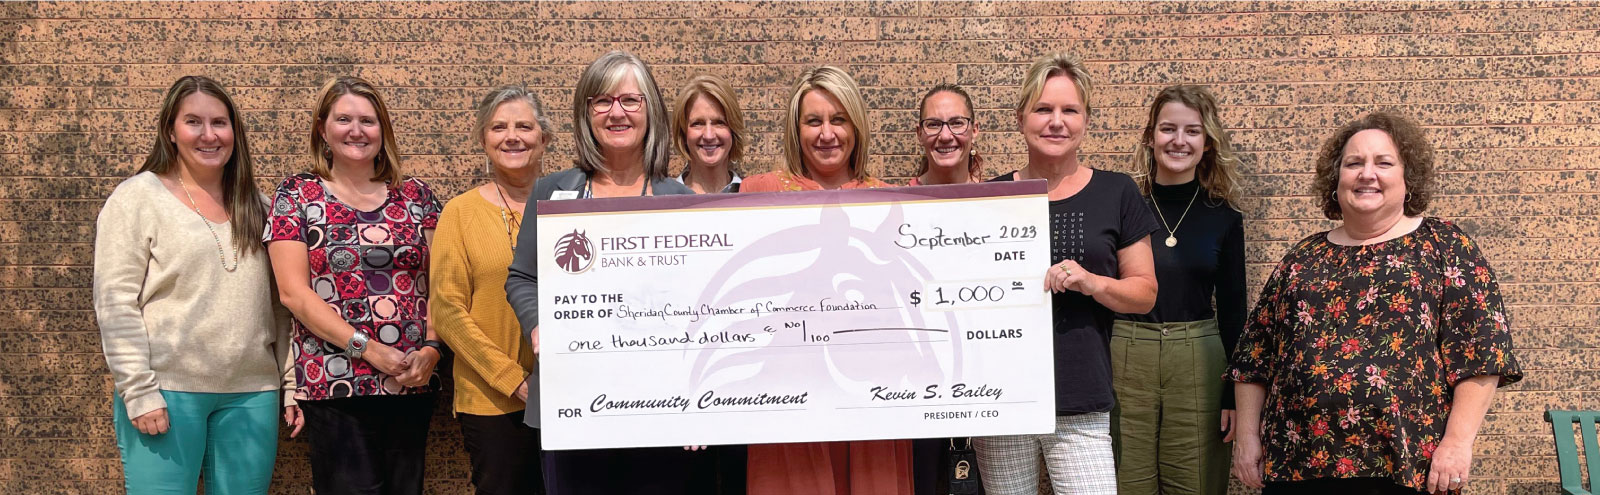 Group of people holding a check for the Sheridan County Chamber of Commerce Foundation